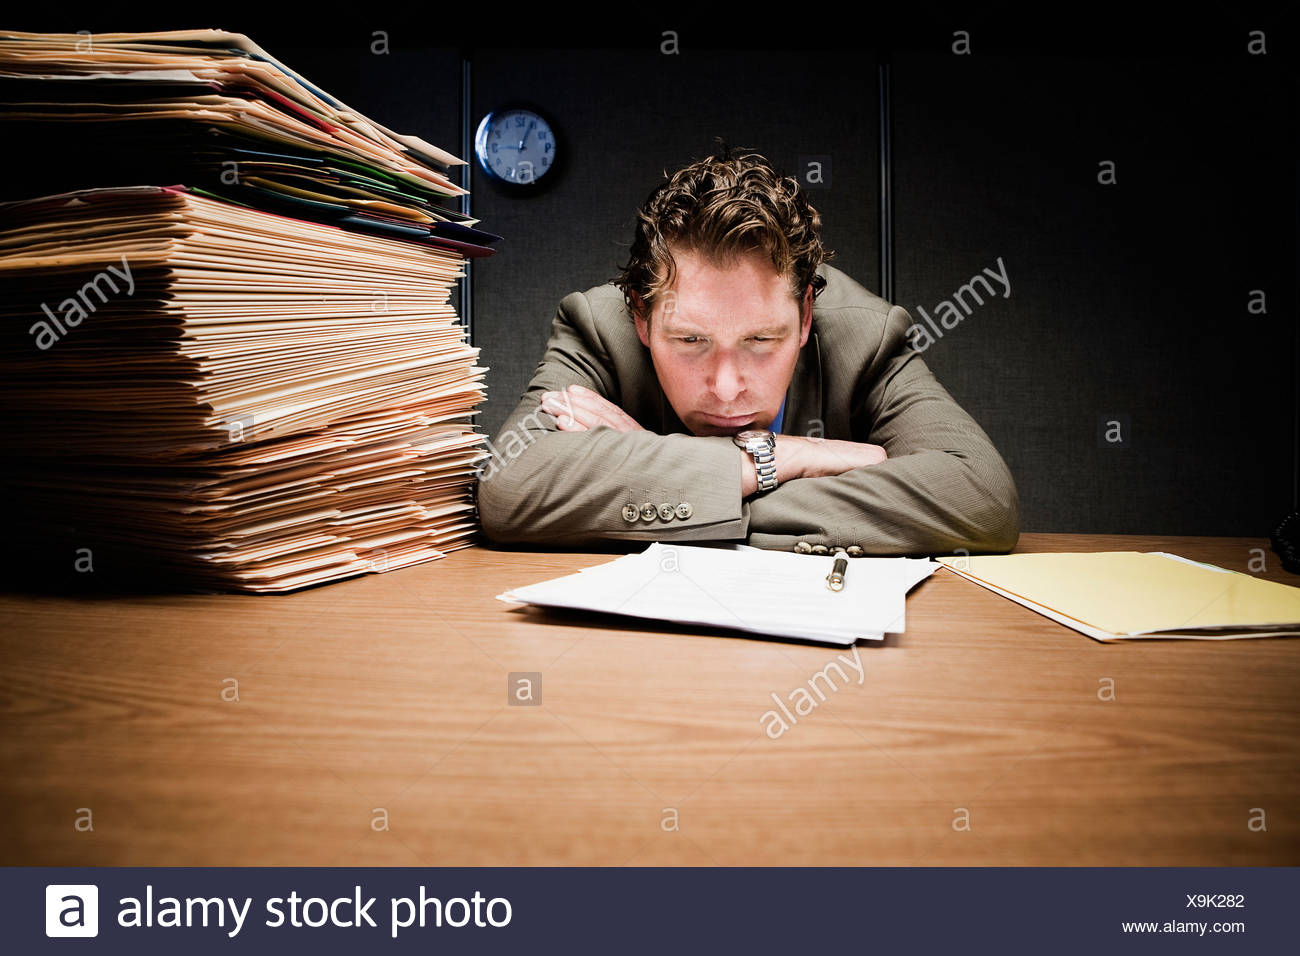 Stressed Man With Head Down On Desk Stock Photo 281316674 Alamy